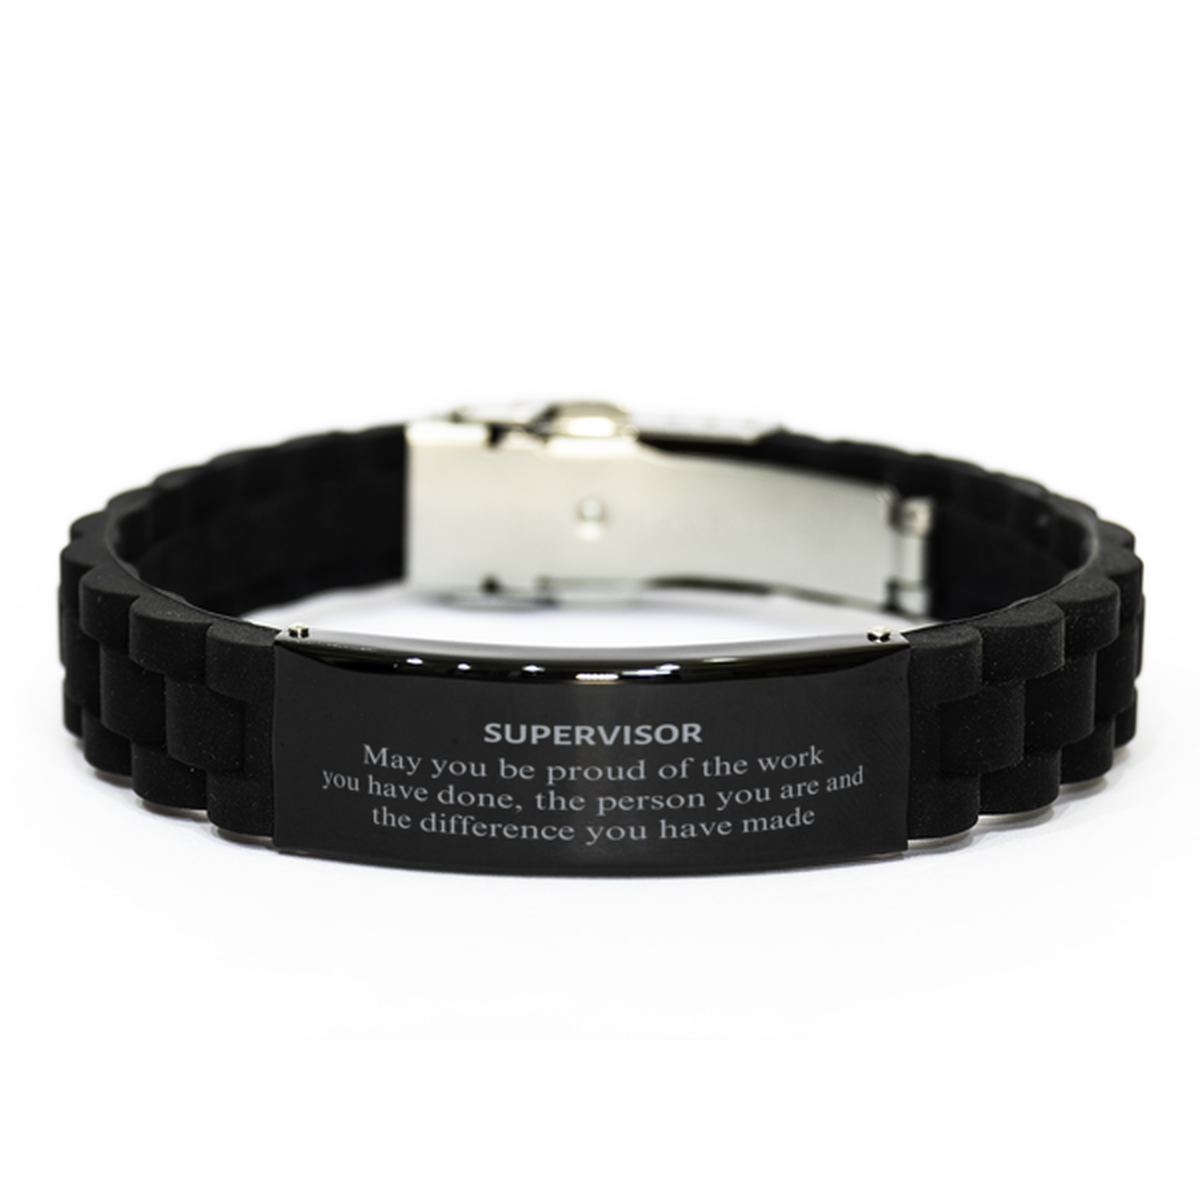 Supervisor May you be proud of the work you have done, Retirement Supervisor Black Glidelock Clasp Bracelet for Colleague Appreciation Gifts Amazing for Supervisor